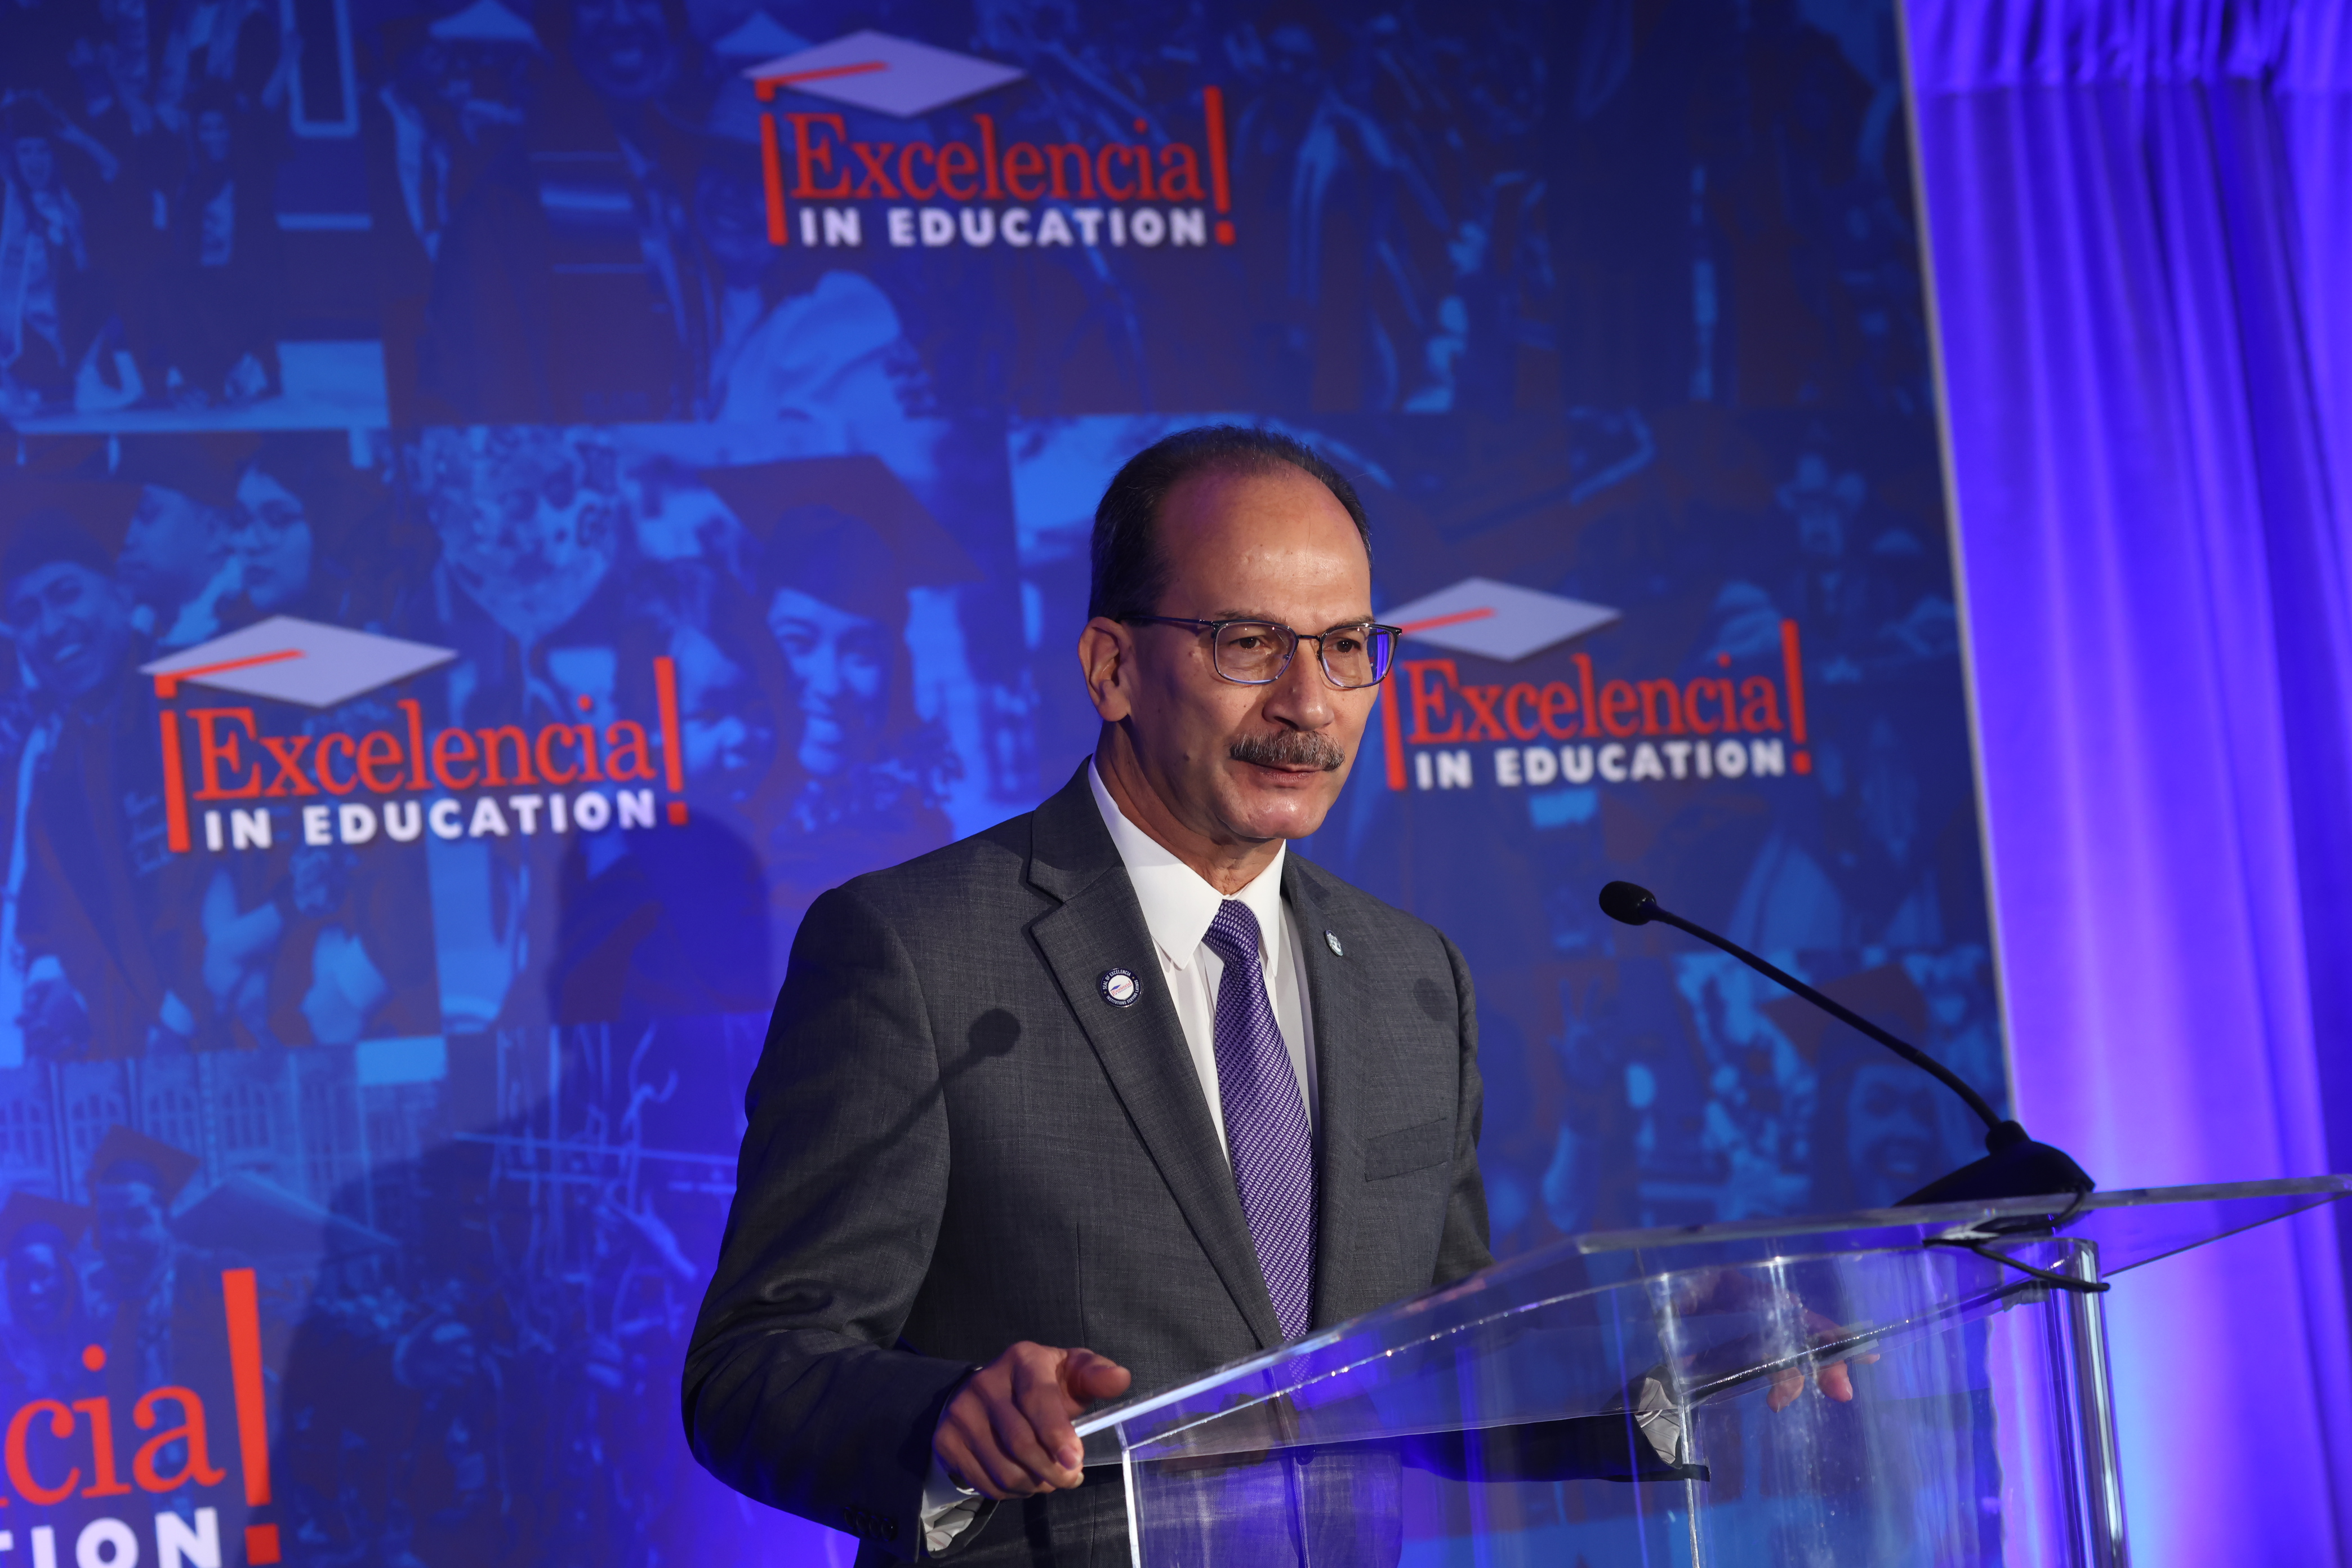 UAlbany President Havidán Rodríguez stands at a clear plastic podium in front of an Excelencia in Education banner to accept the Seal of Excelencia on behalf of UAlbany.